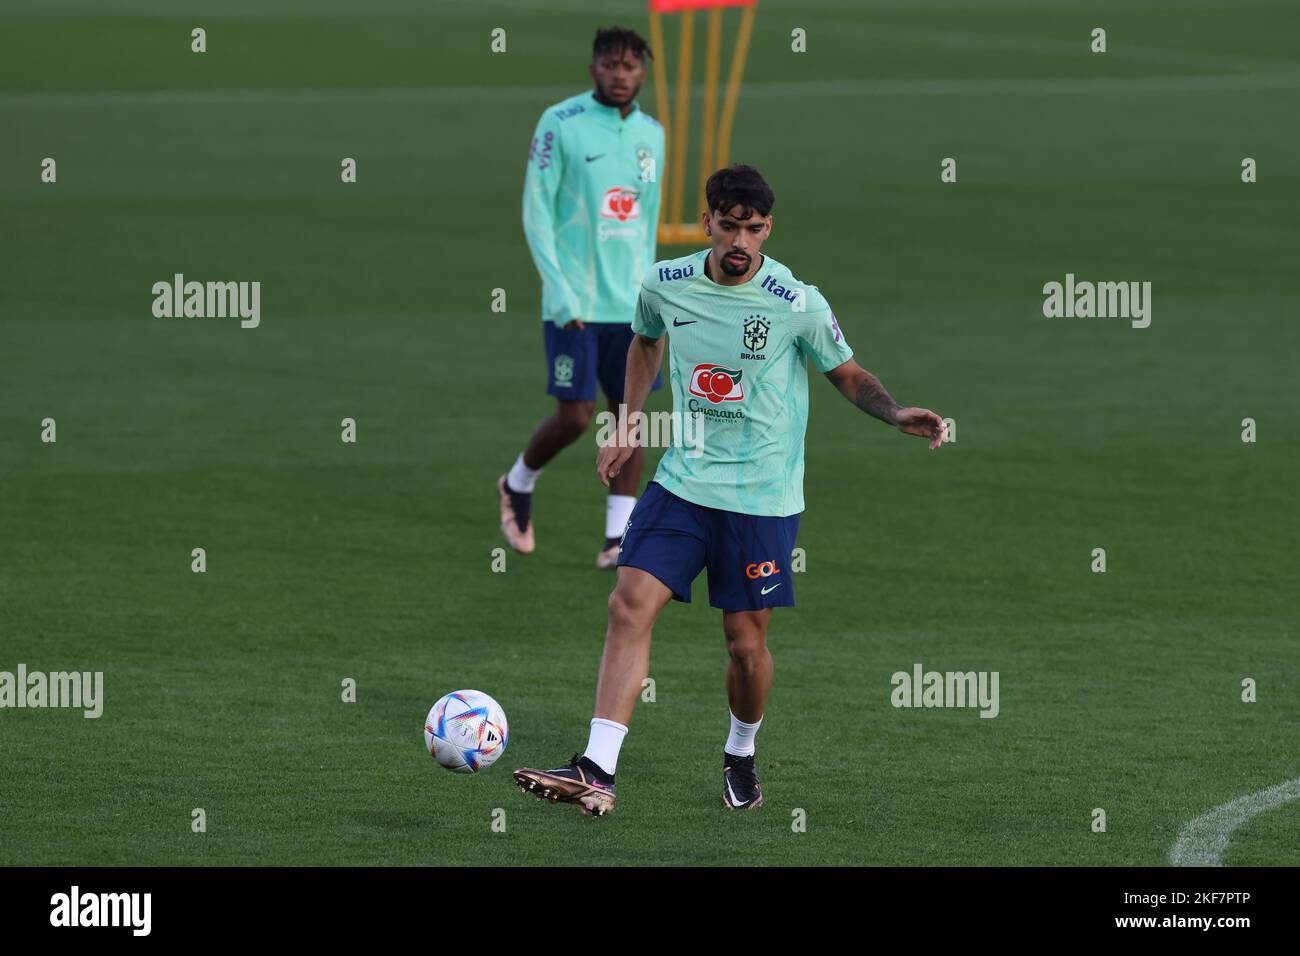 Turin, Italy, 16th November 2022. Fred looks on as Lucas Paqueta of Brazil plays the ball during the Brazil training session at Juventus Training Centre, Turin. Picture date: 16th November 2022. Picture credit should read: Jonathan Moscrop/Sportimage Stock Photo